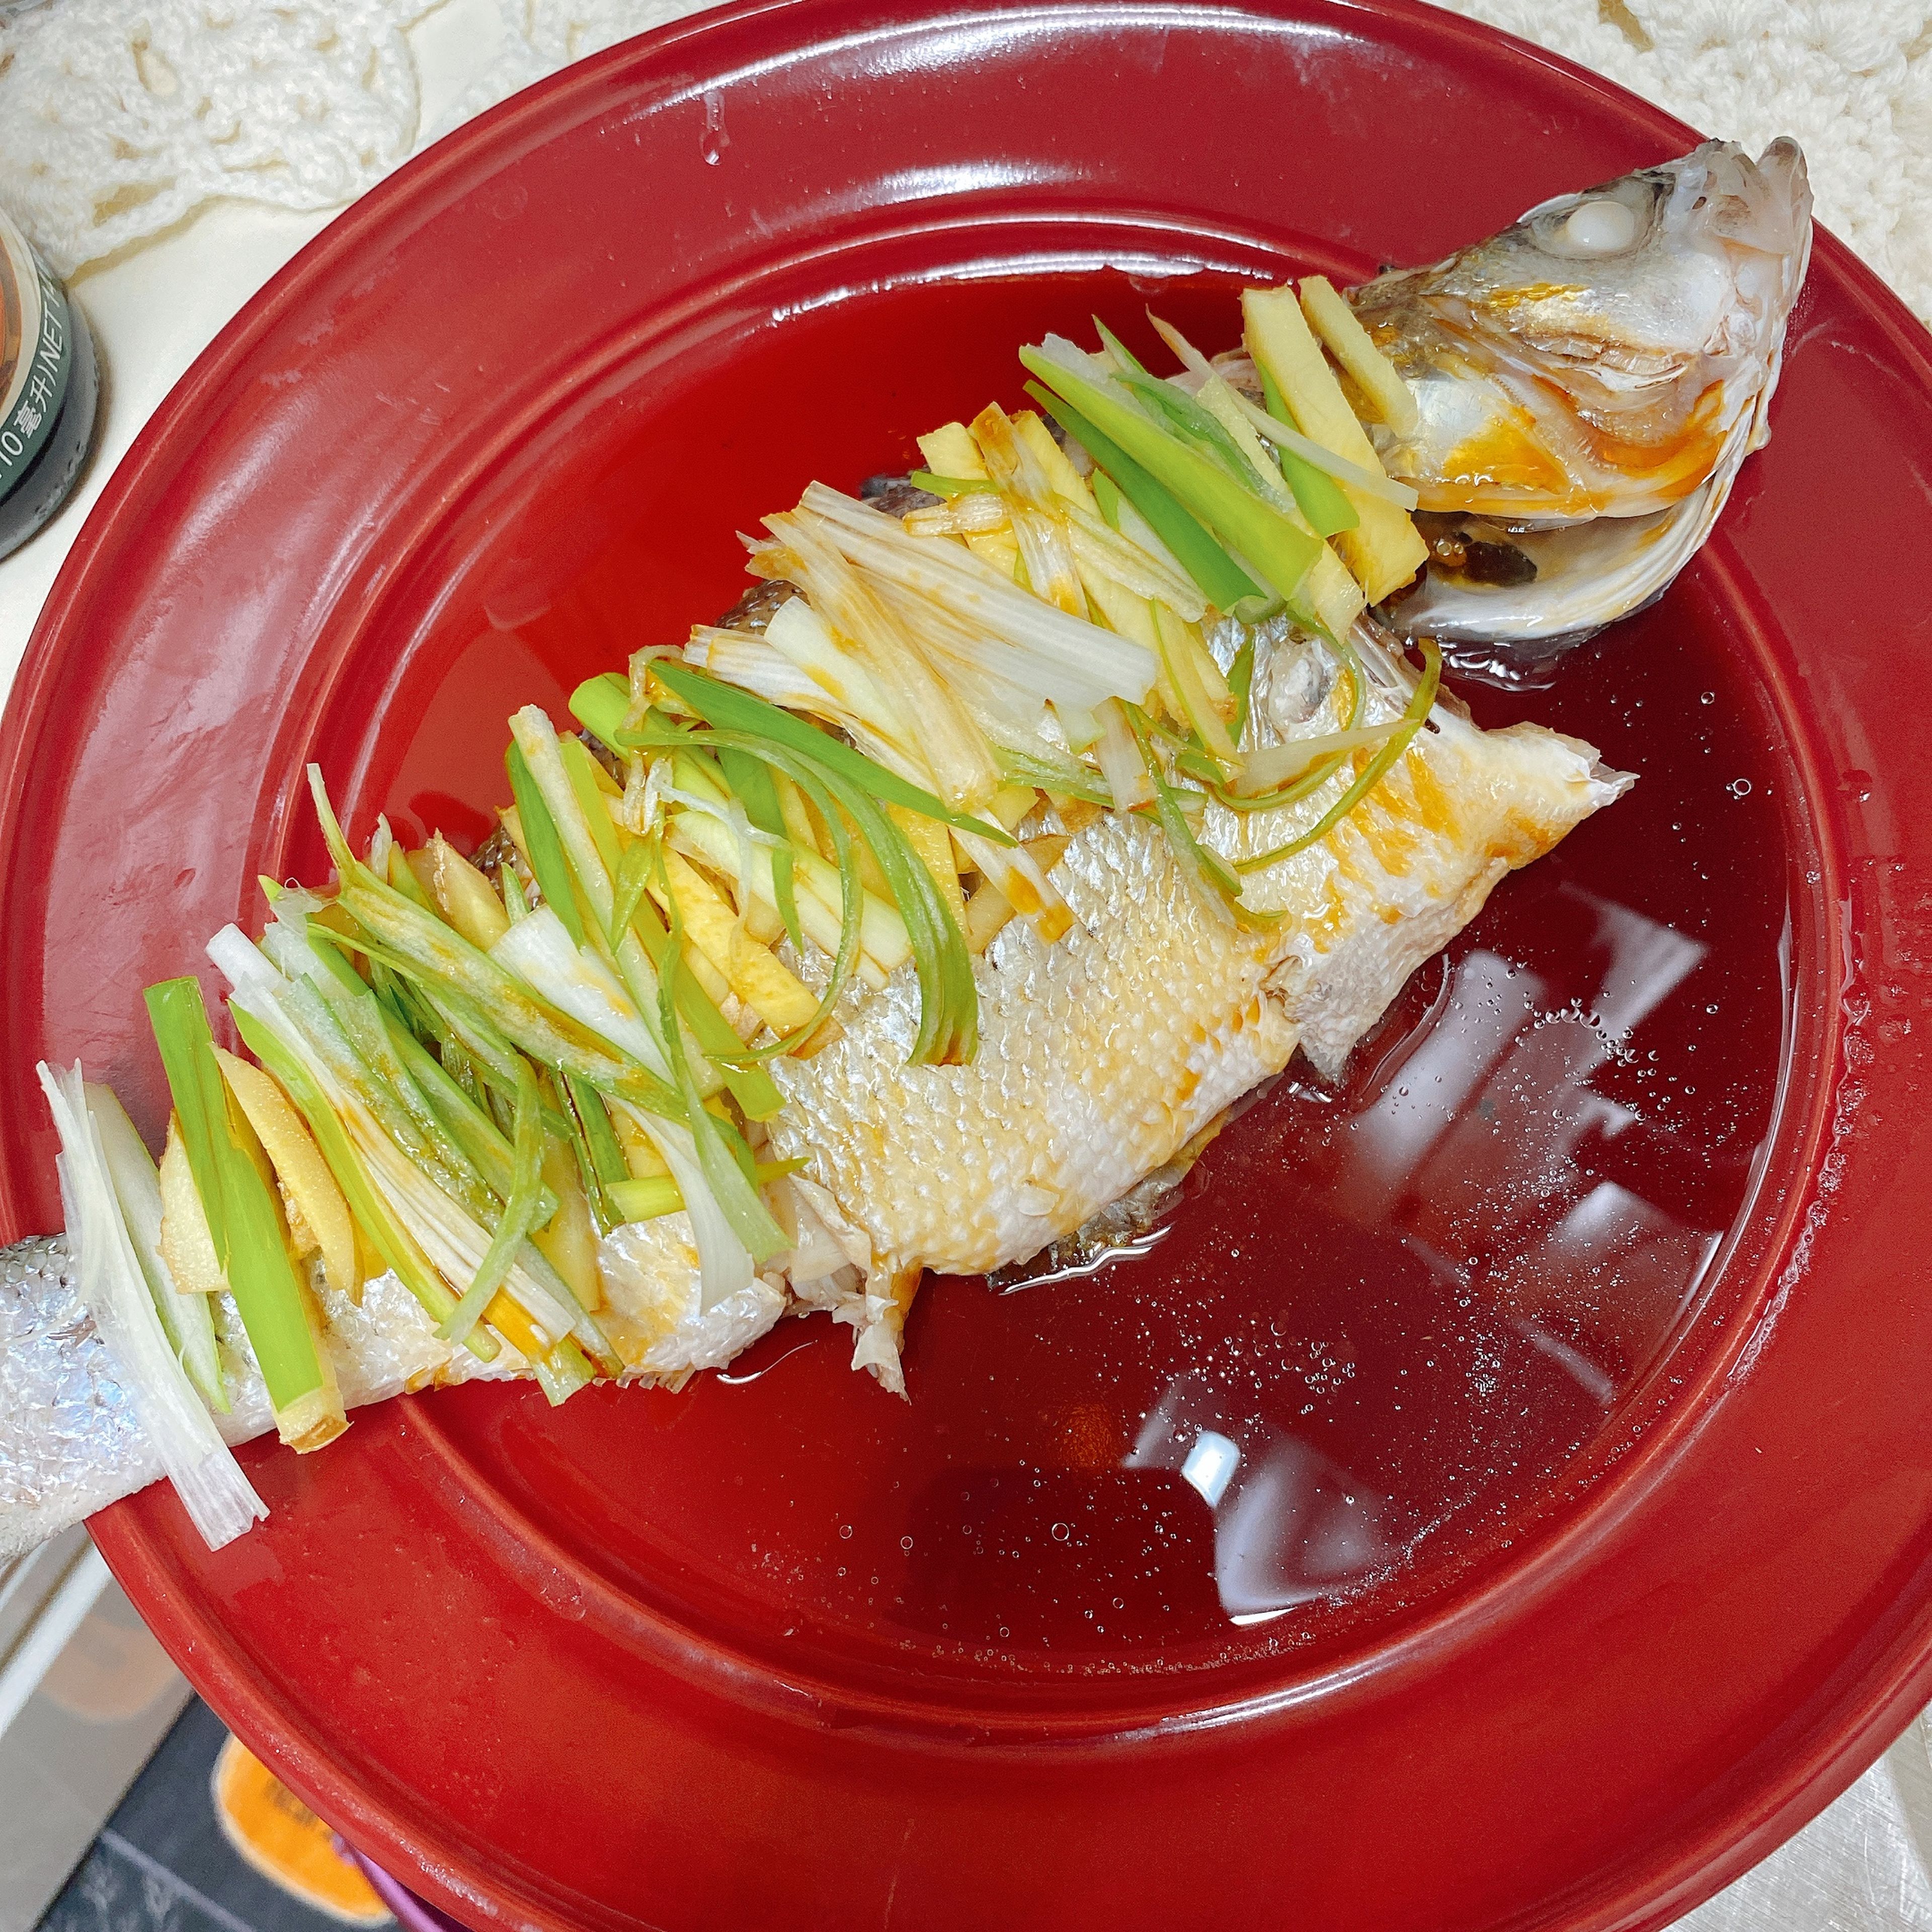 Take the plate out, DISCARD the water left on the plate (or move the fish to another plate), and take out the ginger and scallions. This is very important to get rid of the bloody taste. Lay the rest of ginger and scallions on top of the fish and add the soy sauce for seafood.